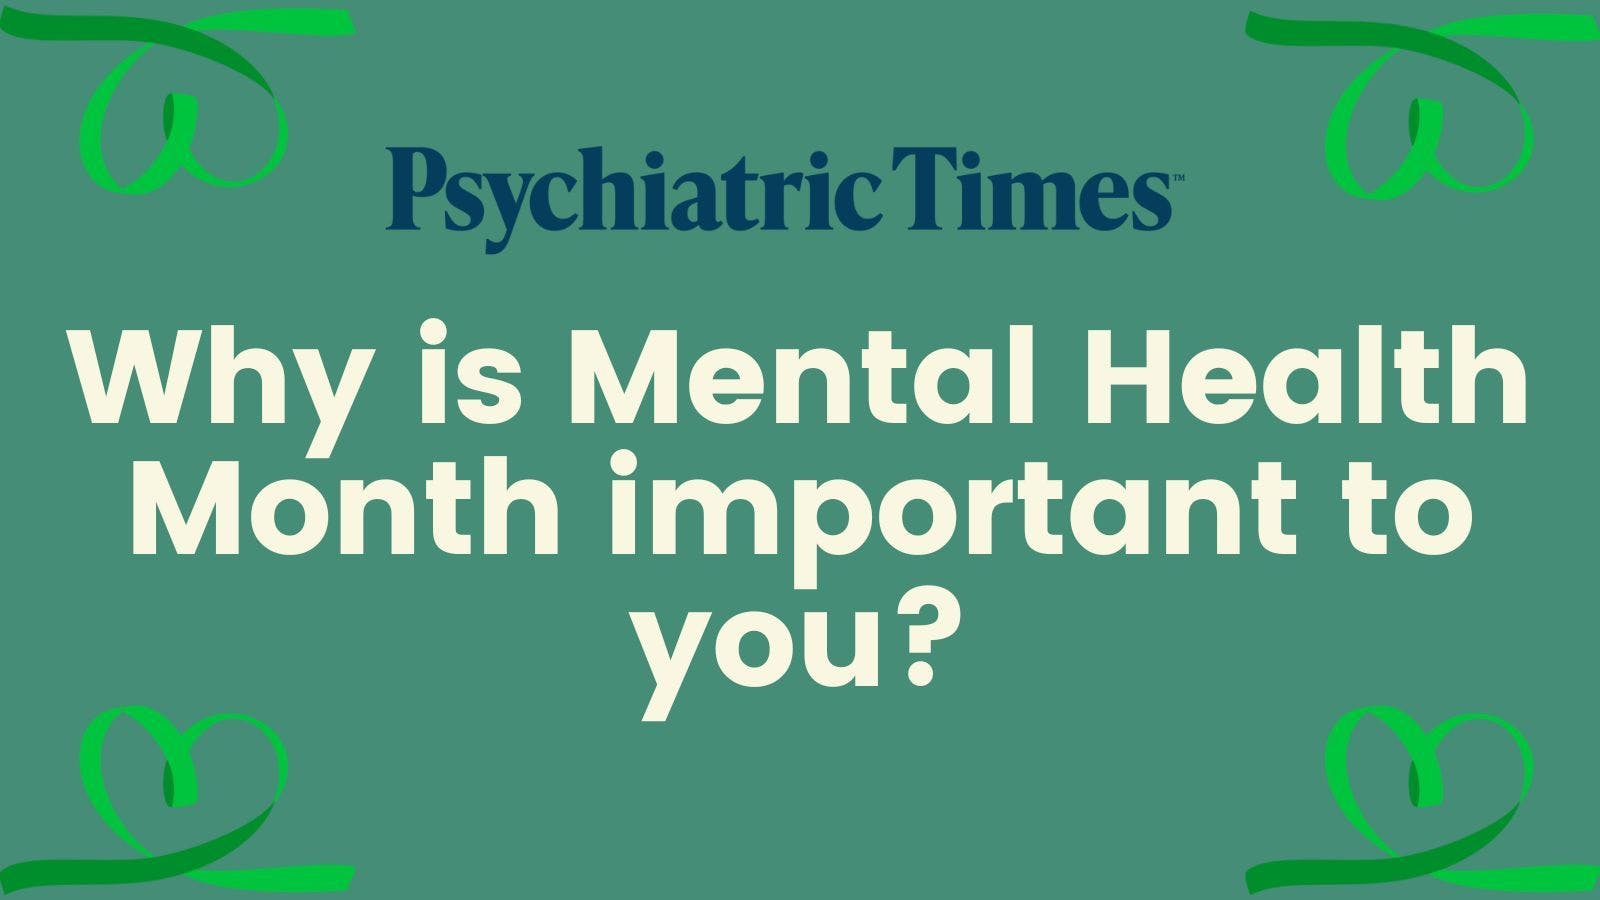 Why is mental health month important to you? 